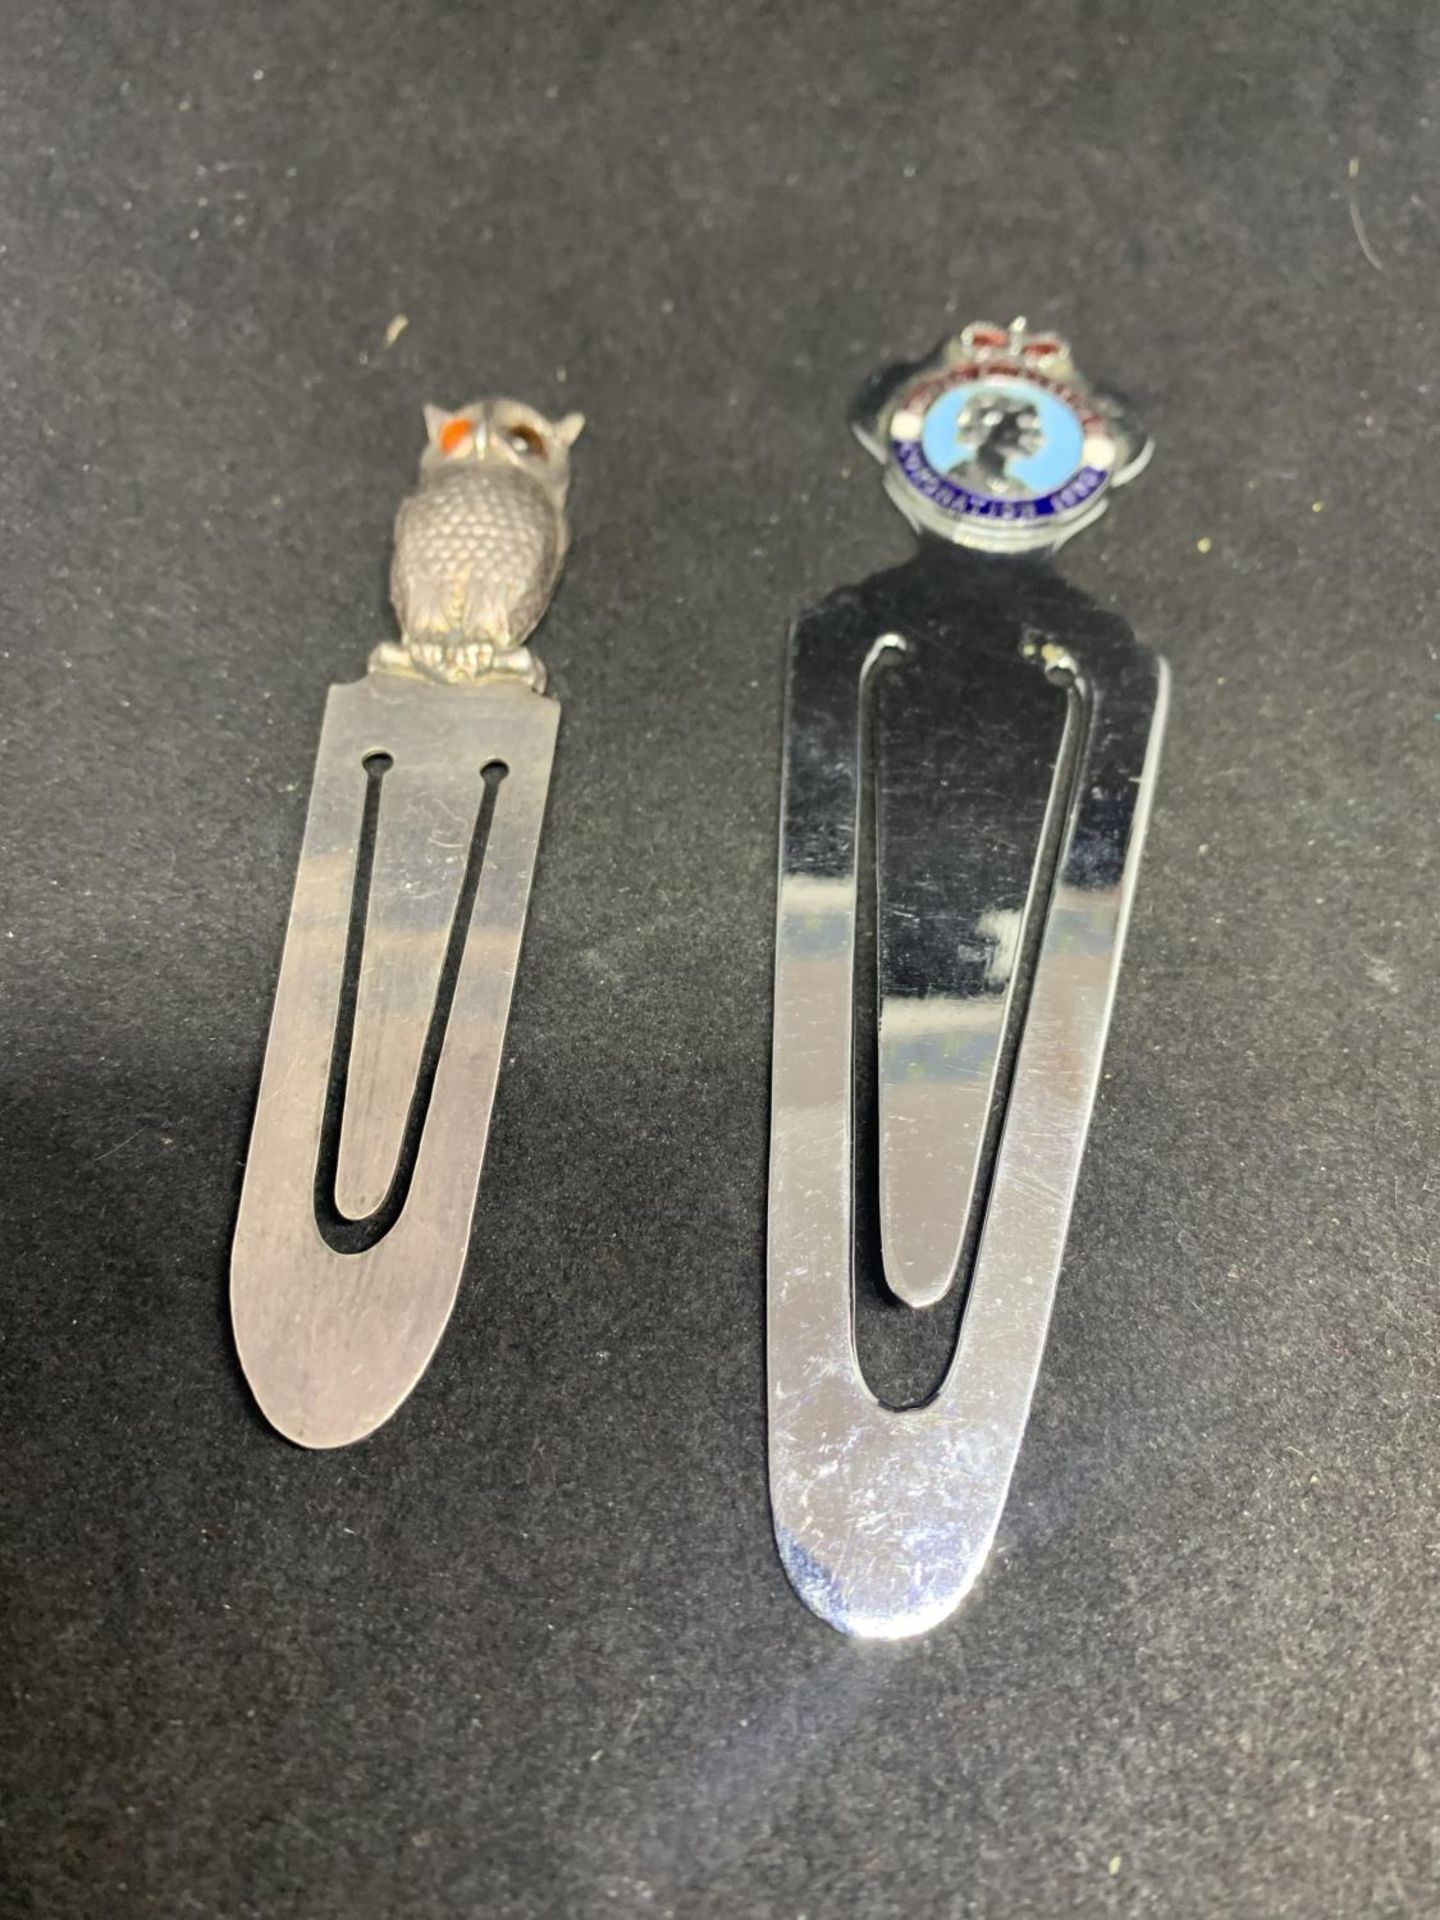 TWO BOOK MARKS TO DEPICT AN OWL AND A QUEEN ELIZABETH CORONATION